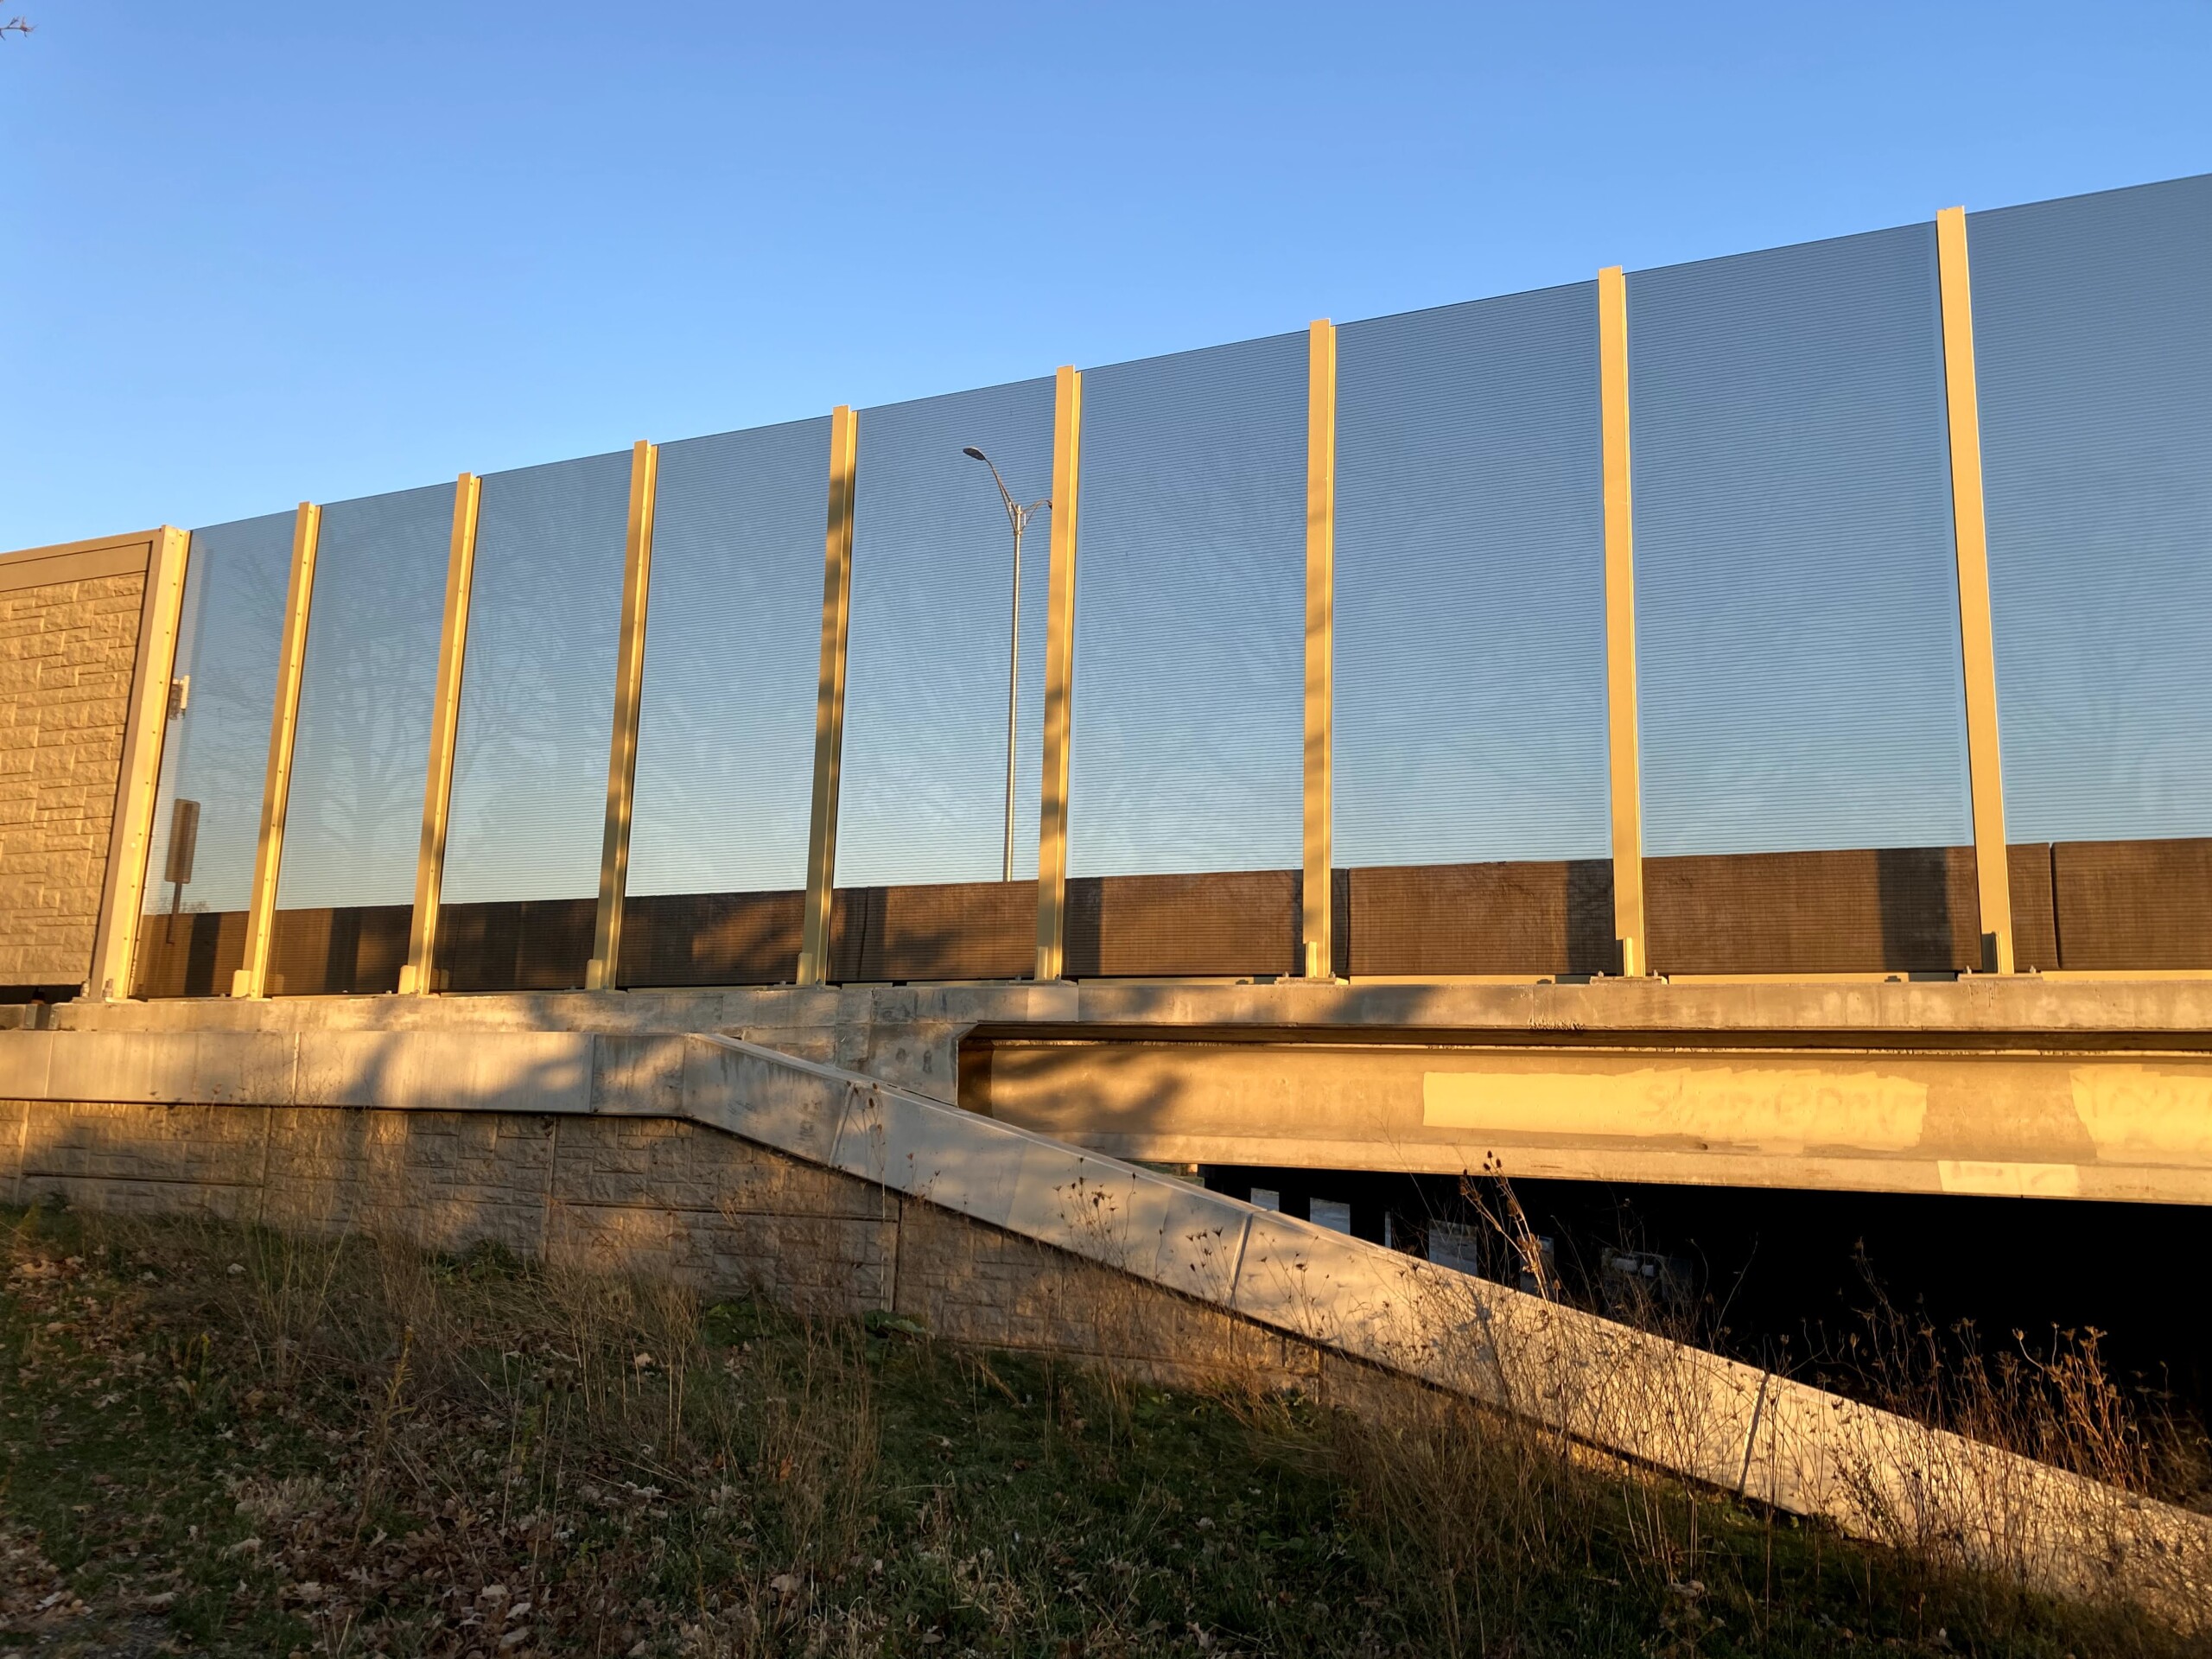 Transparent noise barrier panels with Bird Guard installed on a bridge on the Reagan Memorial Highway (I-88) in Elmhurst, IL.